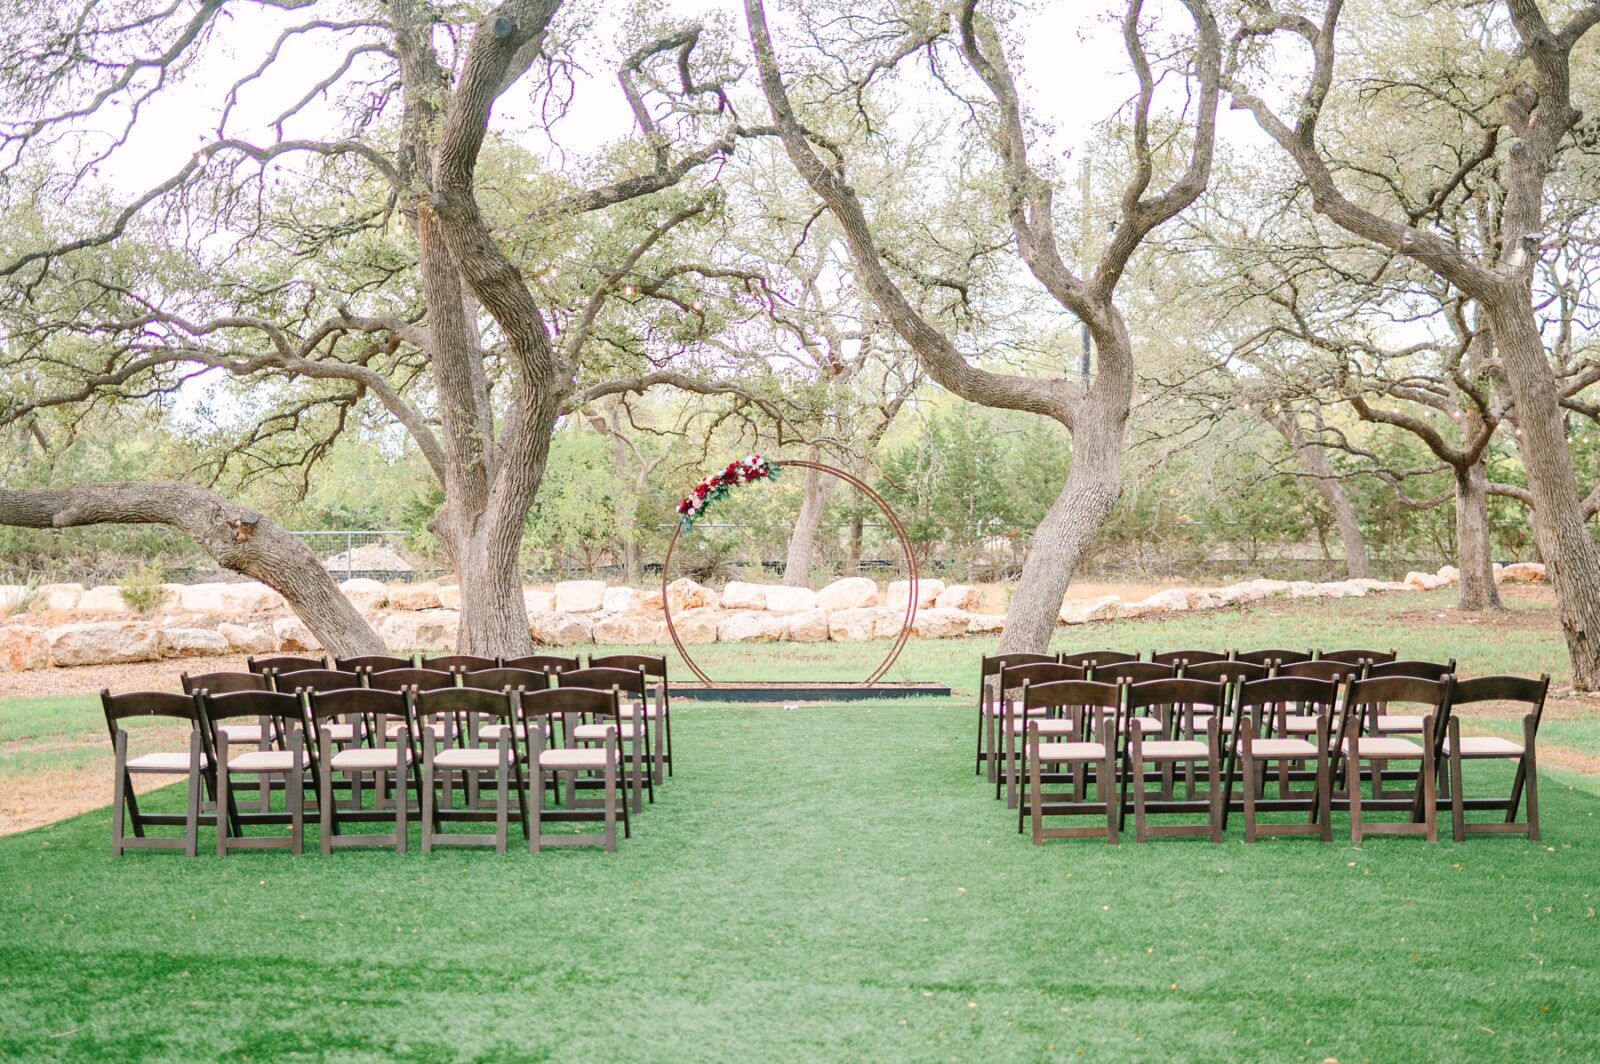 distillers hall outdoor ceremony space, small wedding, intimate wedding at distillers hall, dripping springs distillery wedding ceremony